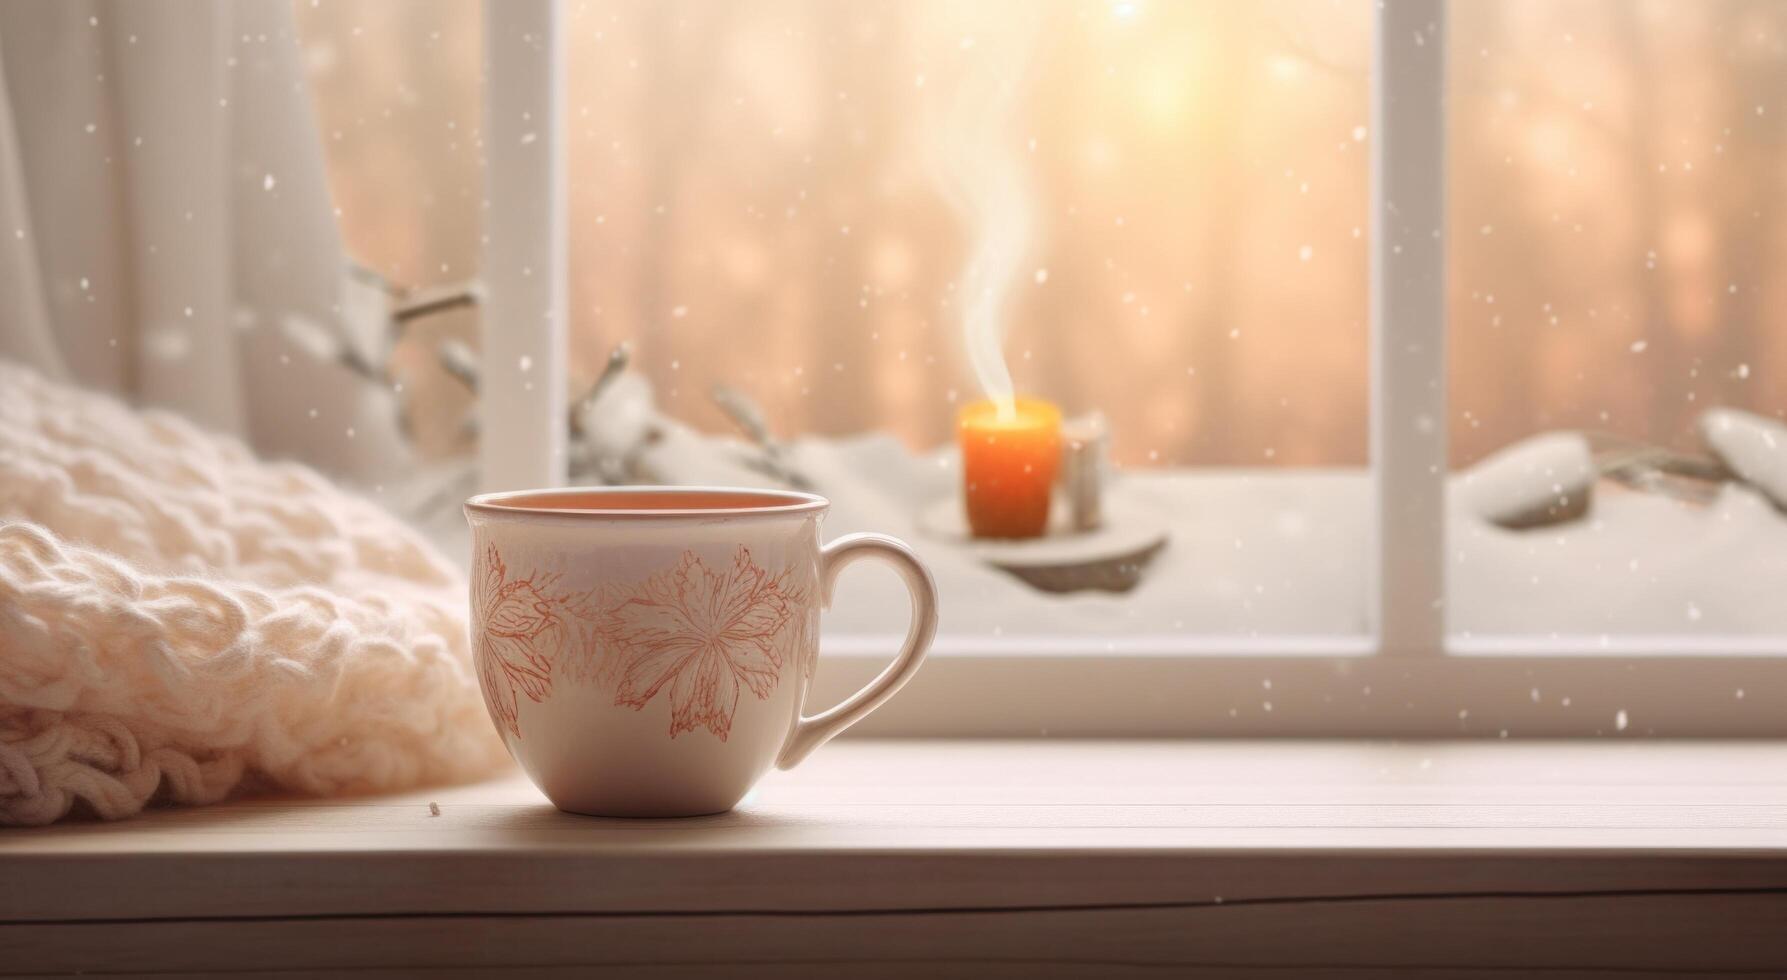 AI generated the cup sits in front of a window in the winter photo